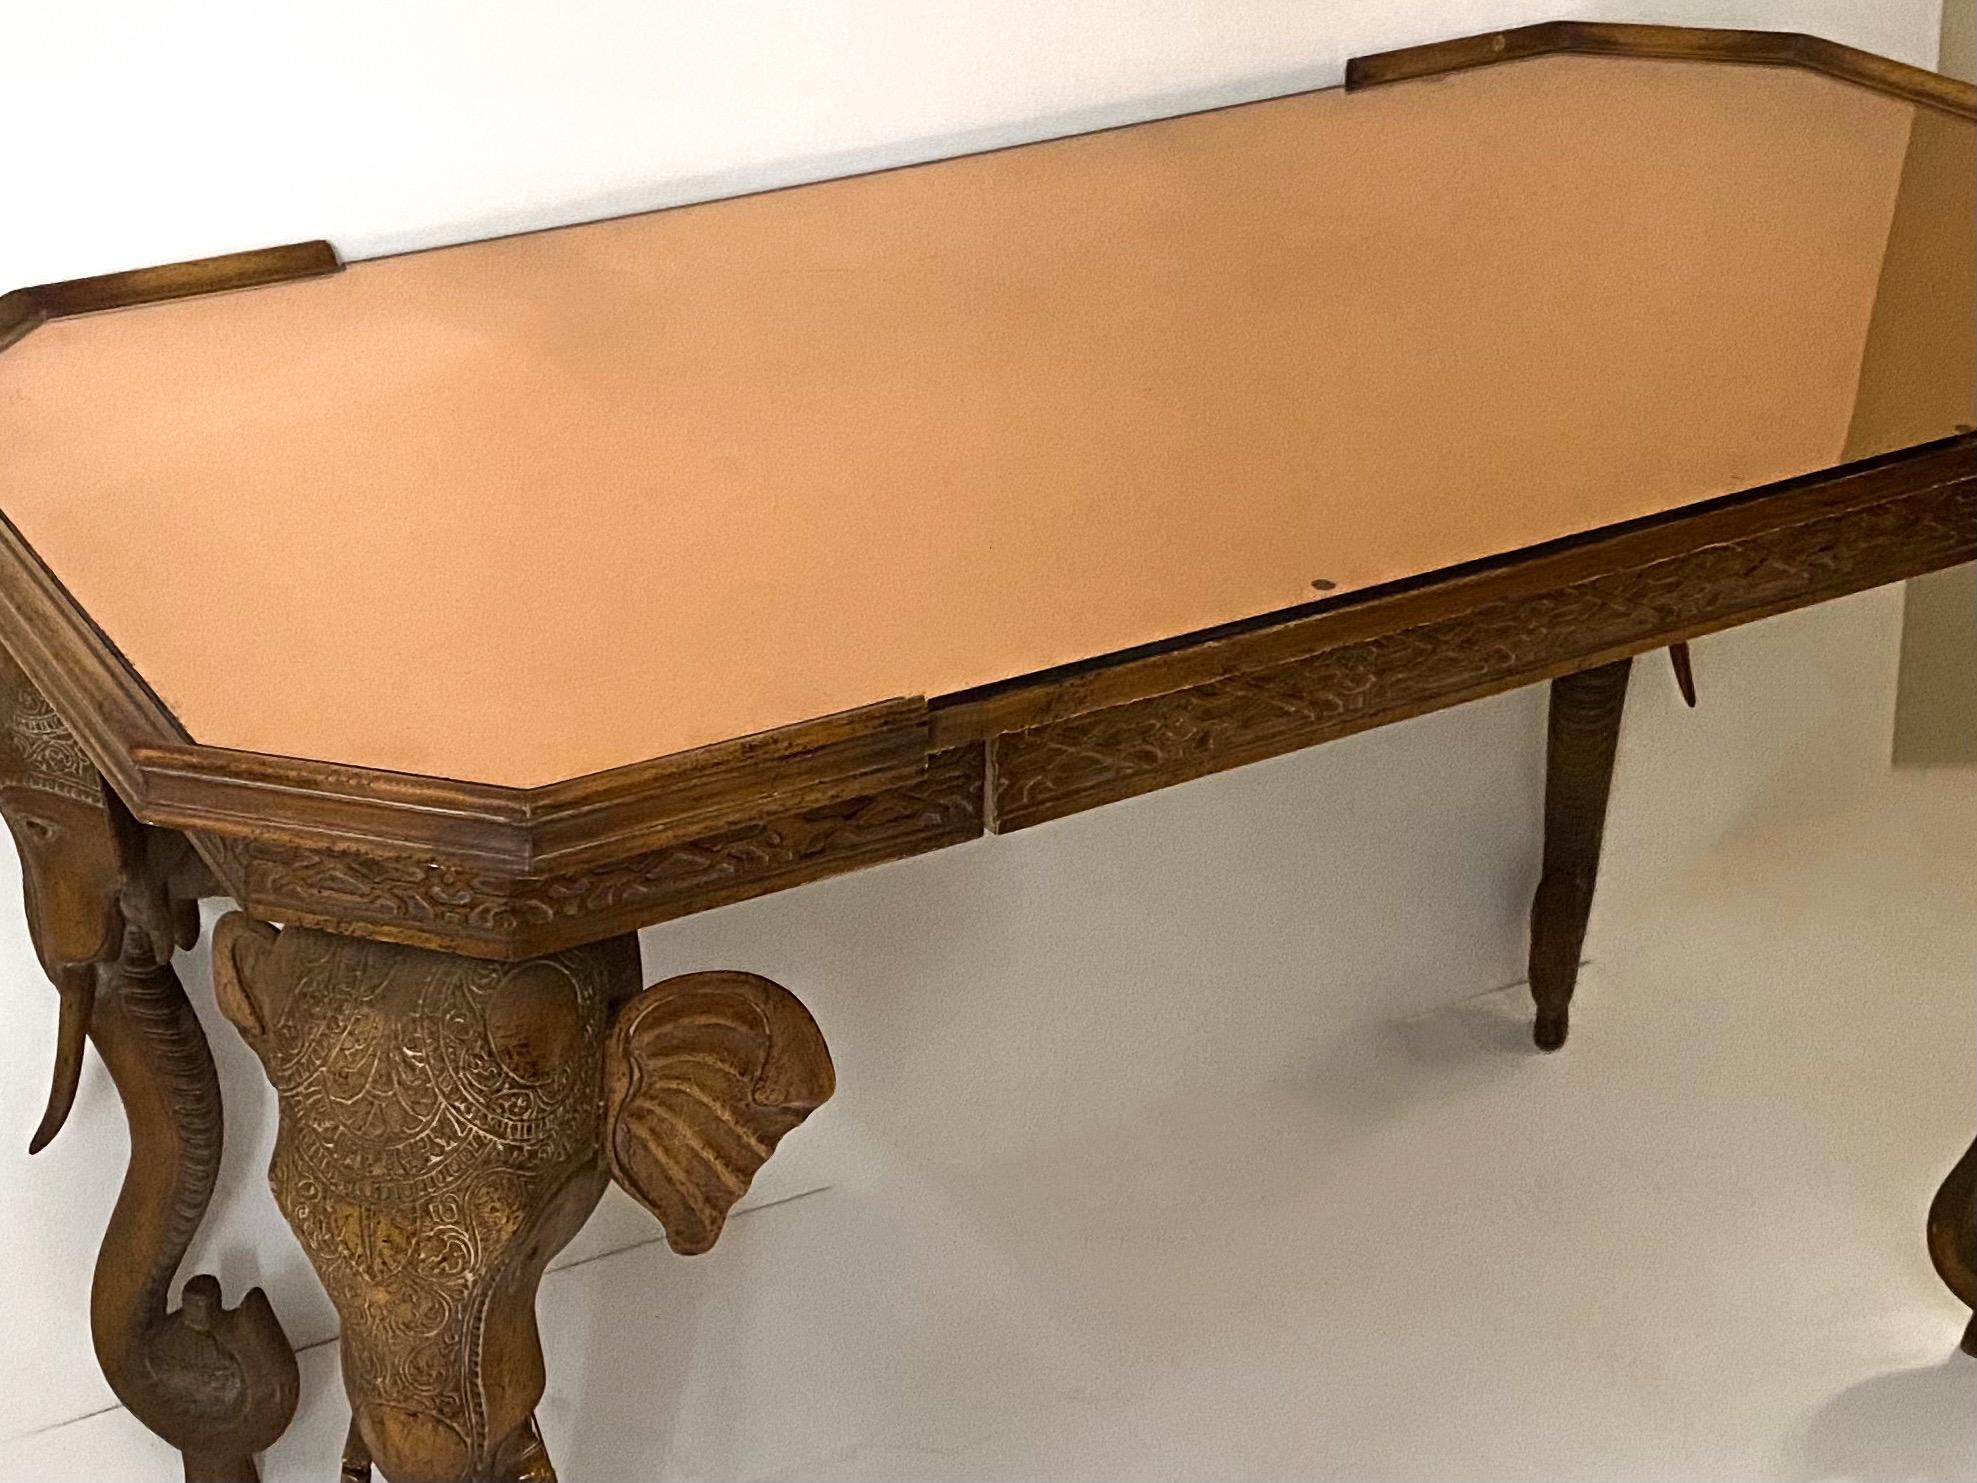 This is a 1970s Chinese Chippendale style elephant form desk attributed to Gampel-Stoll. It has a removable copper washed mirror top includes the original pagoda chair. The desk has a single drawer, and the fretwork wraps around the desk. The desk